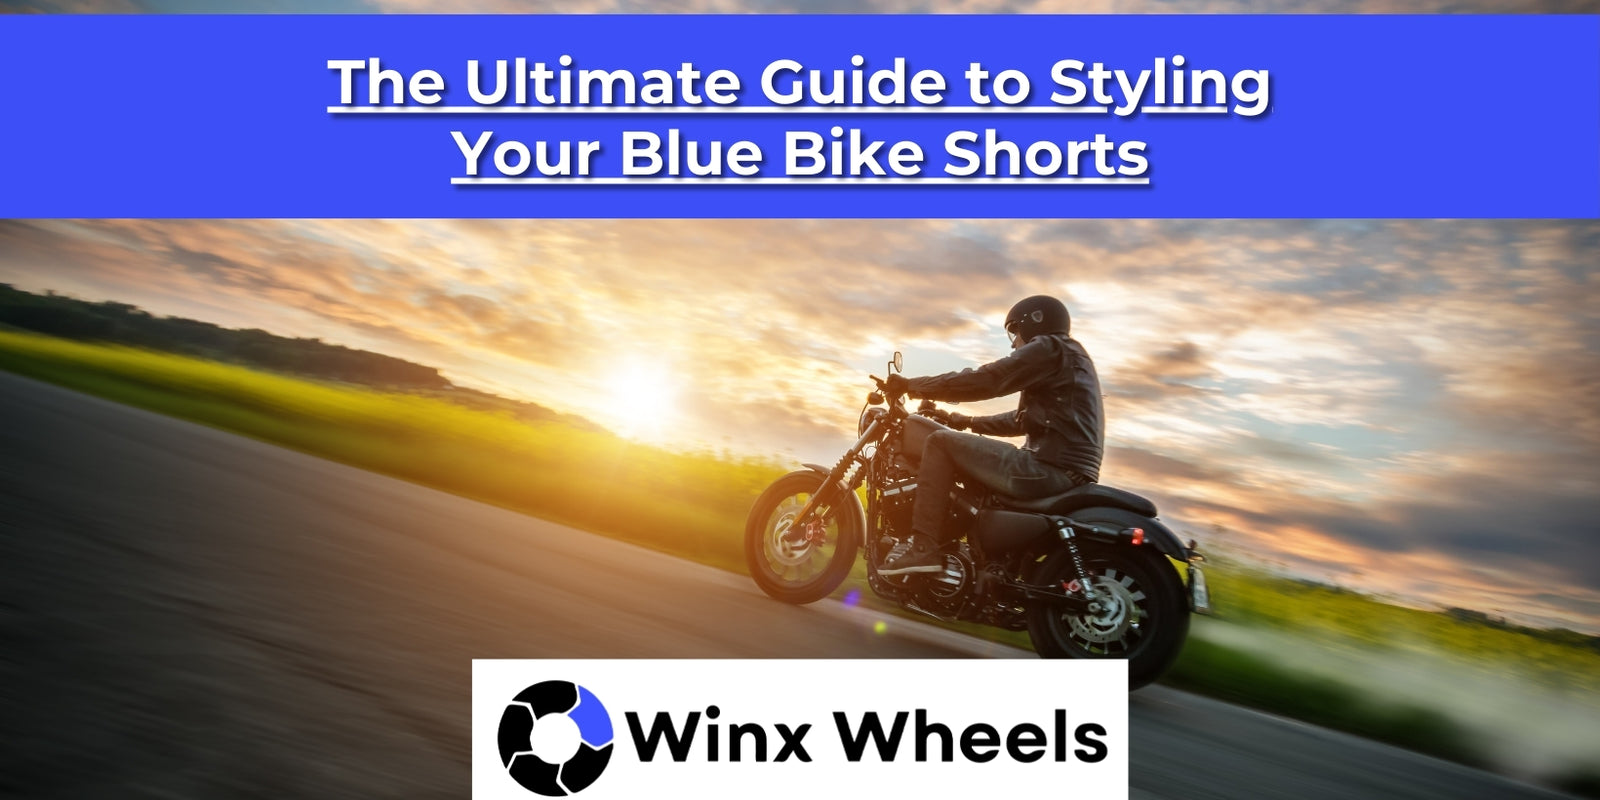 The Ultimate Guide to Styling Your Blue Bike Shorts